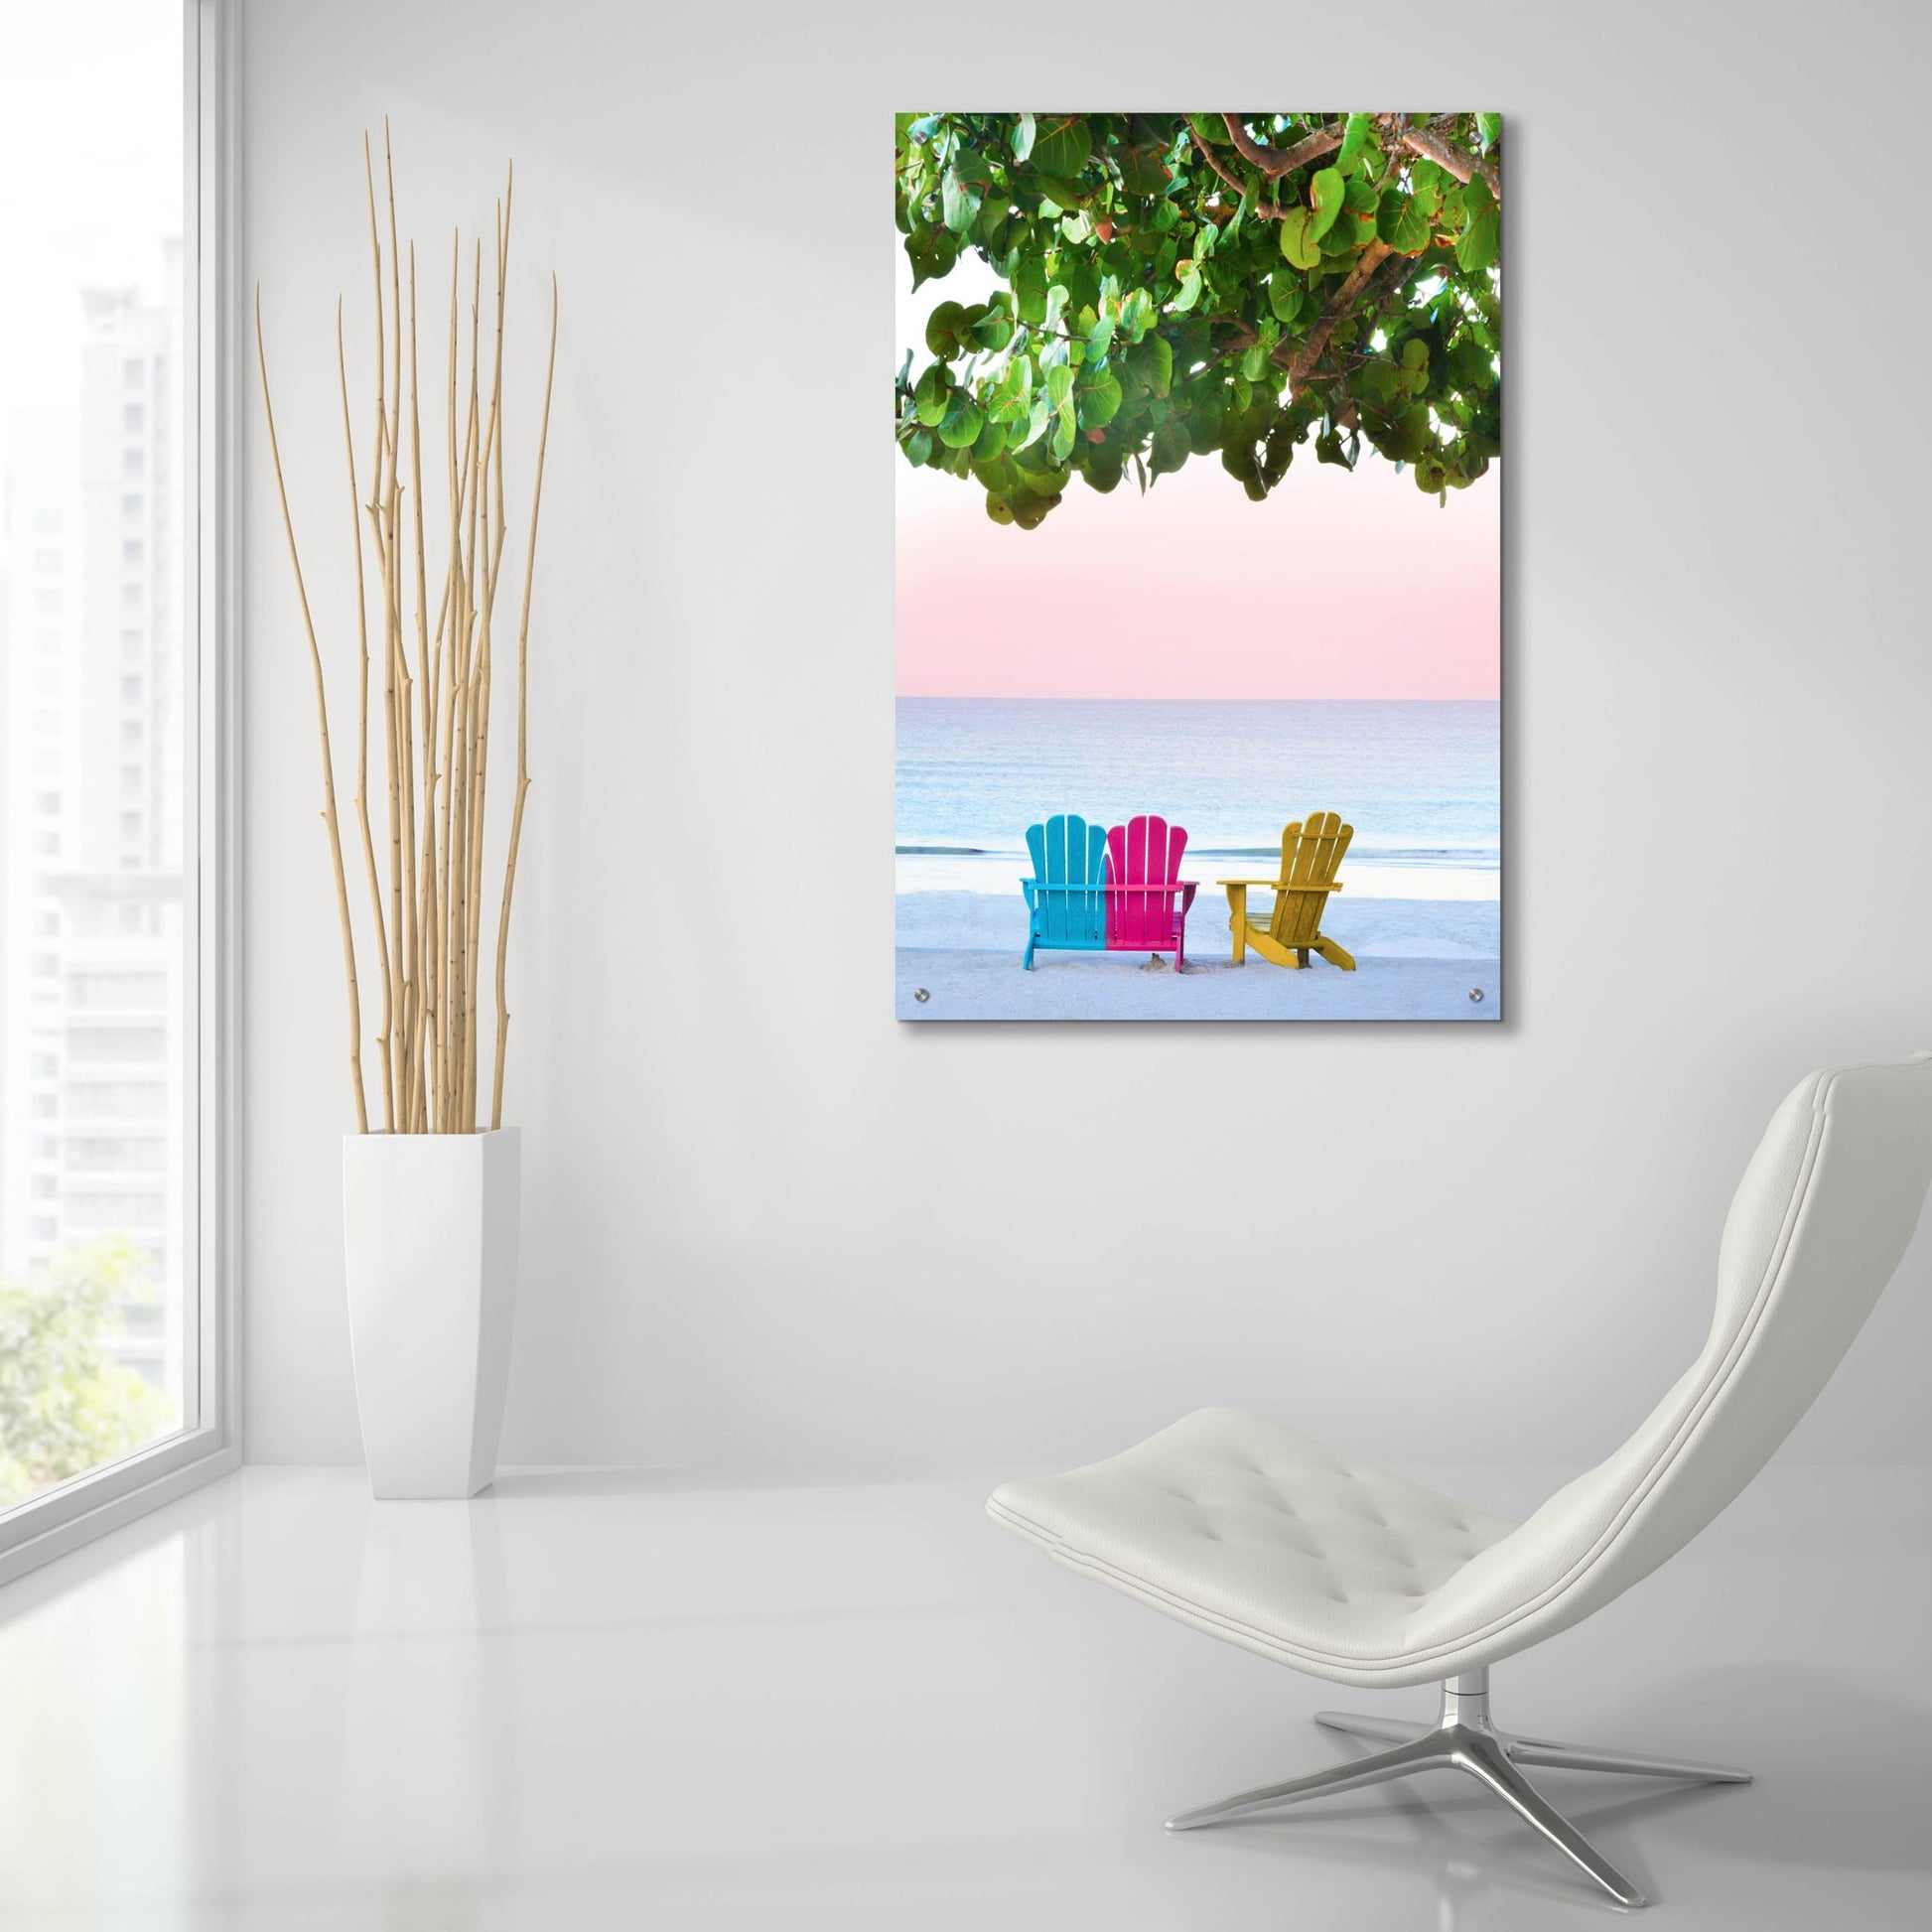 Epic Art ' Three Chairs' by Jack Reed, Acrylic Glass Wall Art,24x36